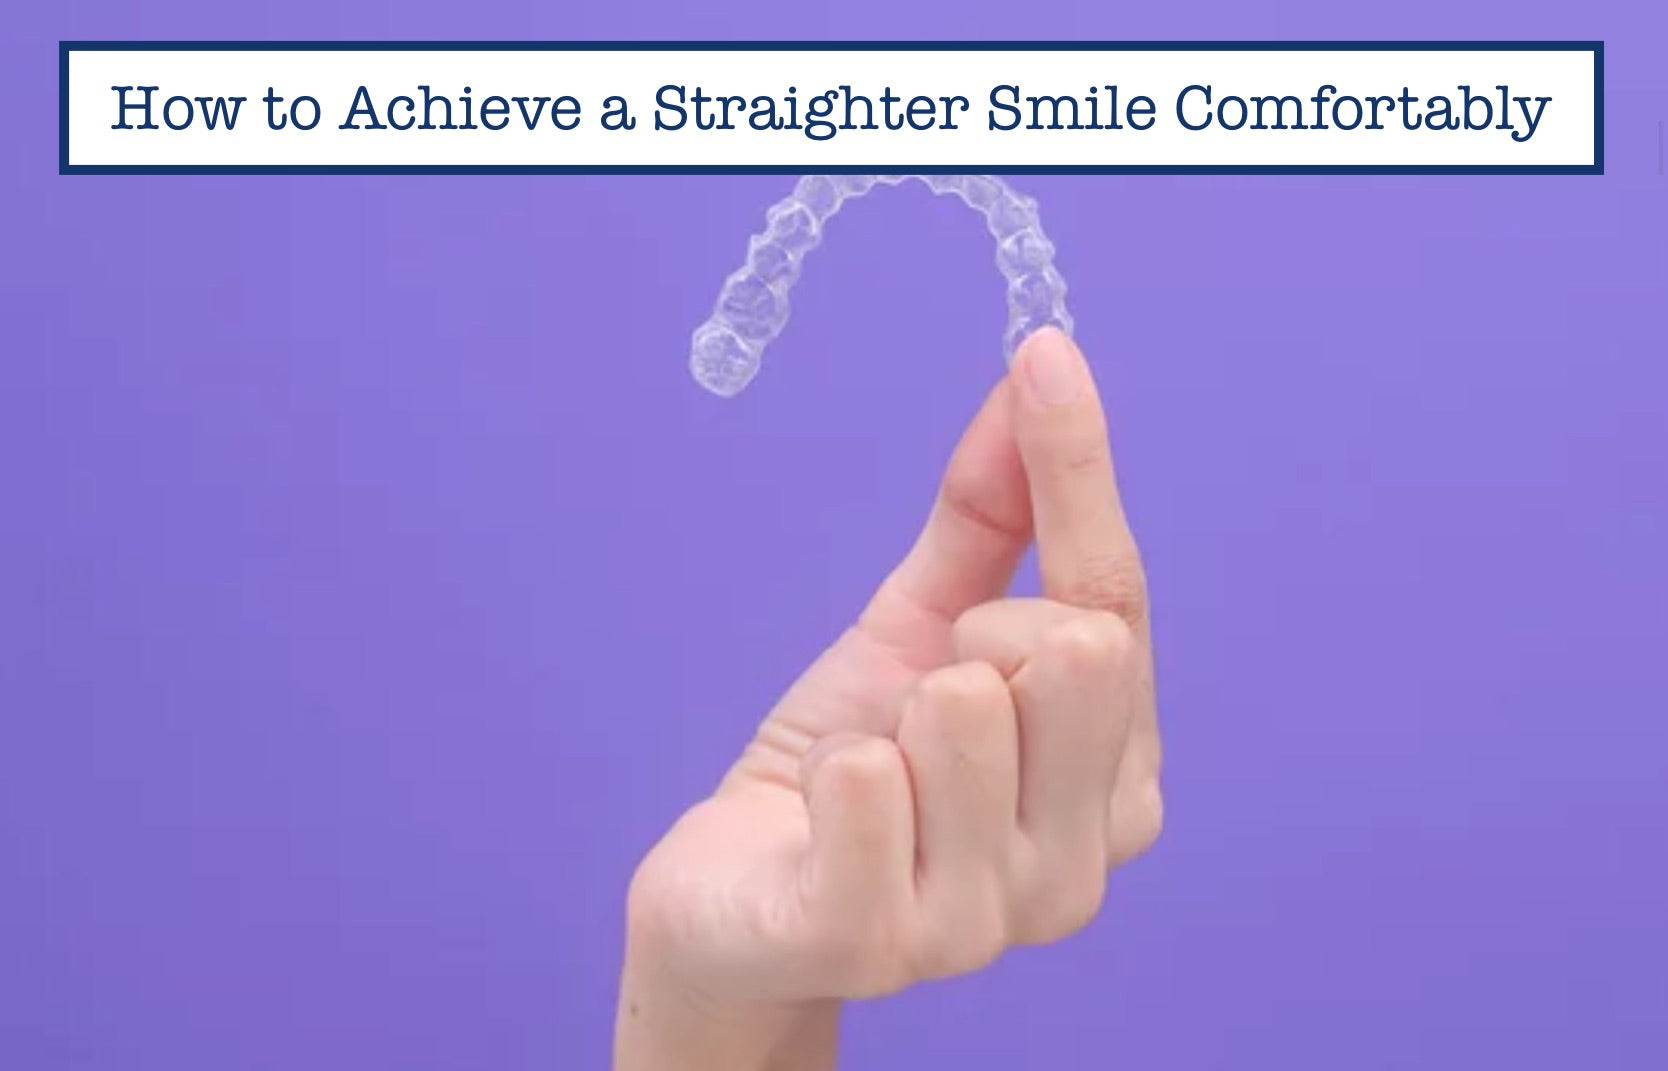 How to Achieve a Straighter Smile Comfortably